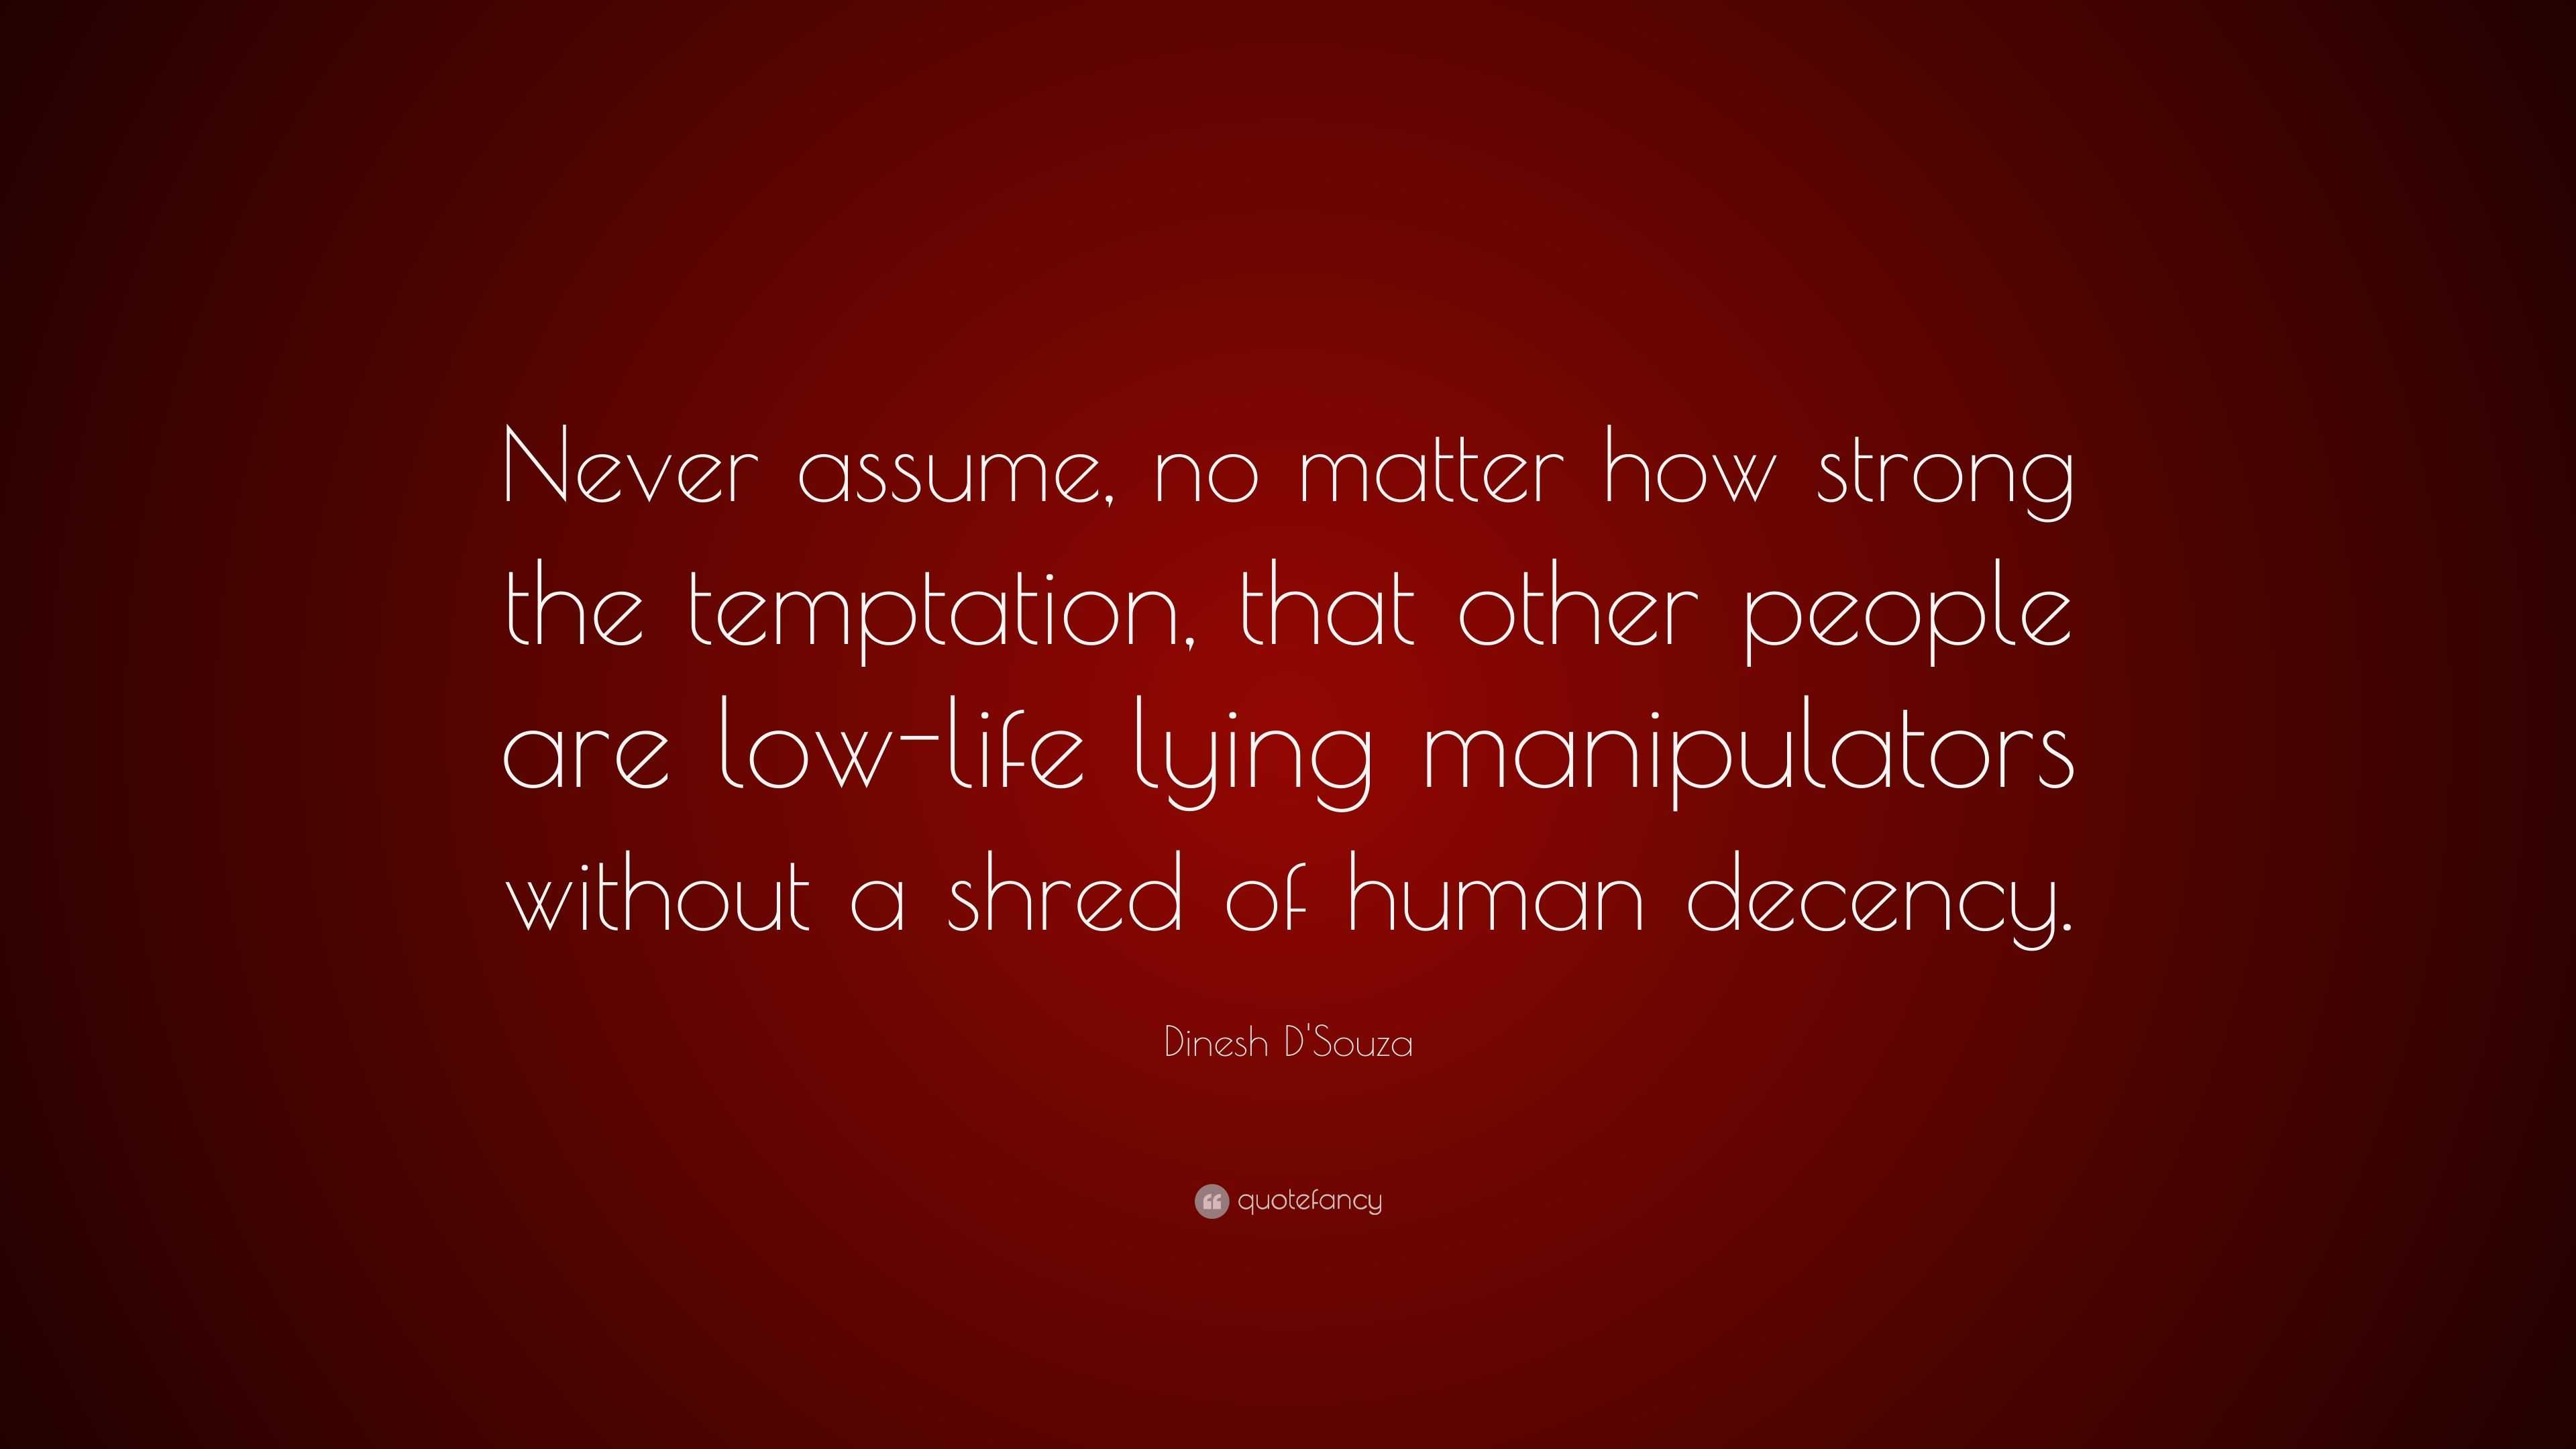 low life people quotes dinesh d u0027souza quote u201cnever assume no matter how strong the